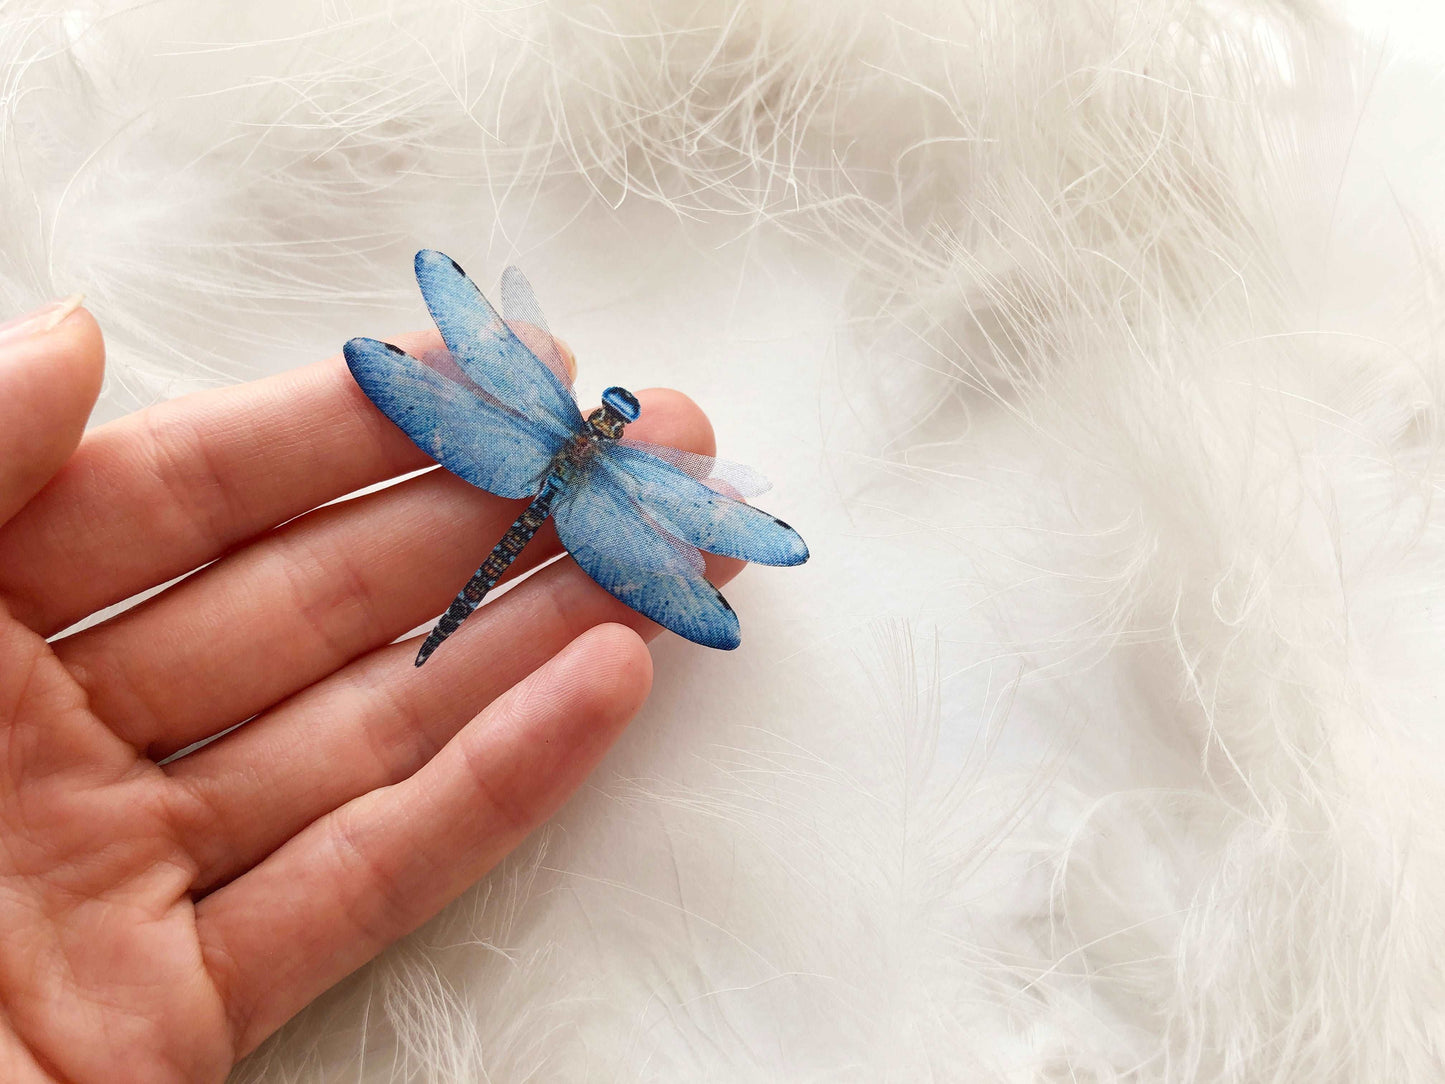 Blue Dragonfly on Hand with White Background and Feathers